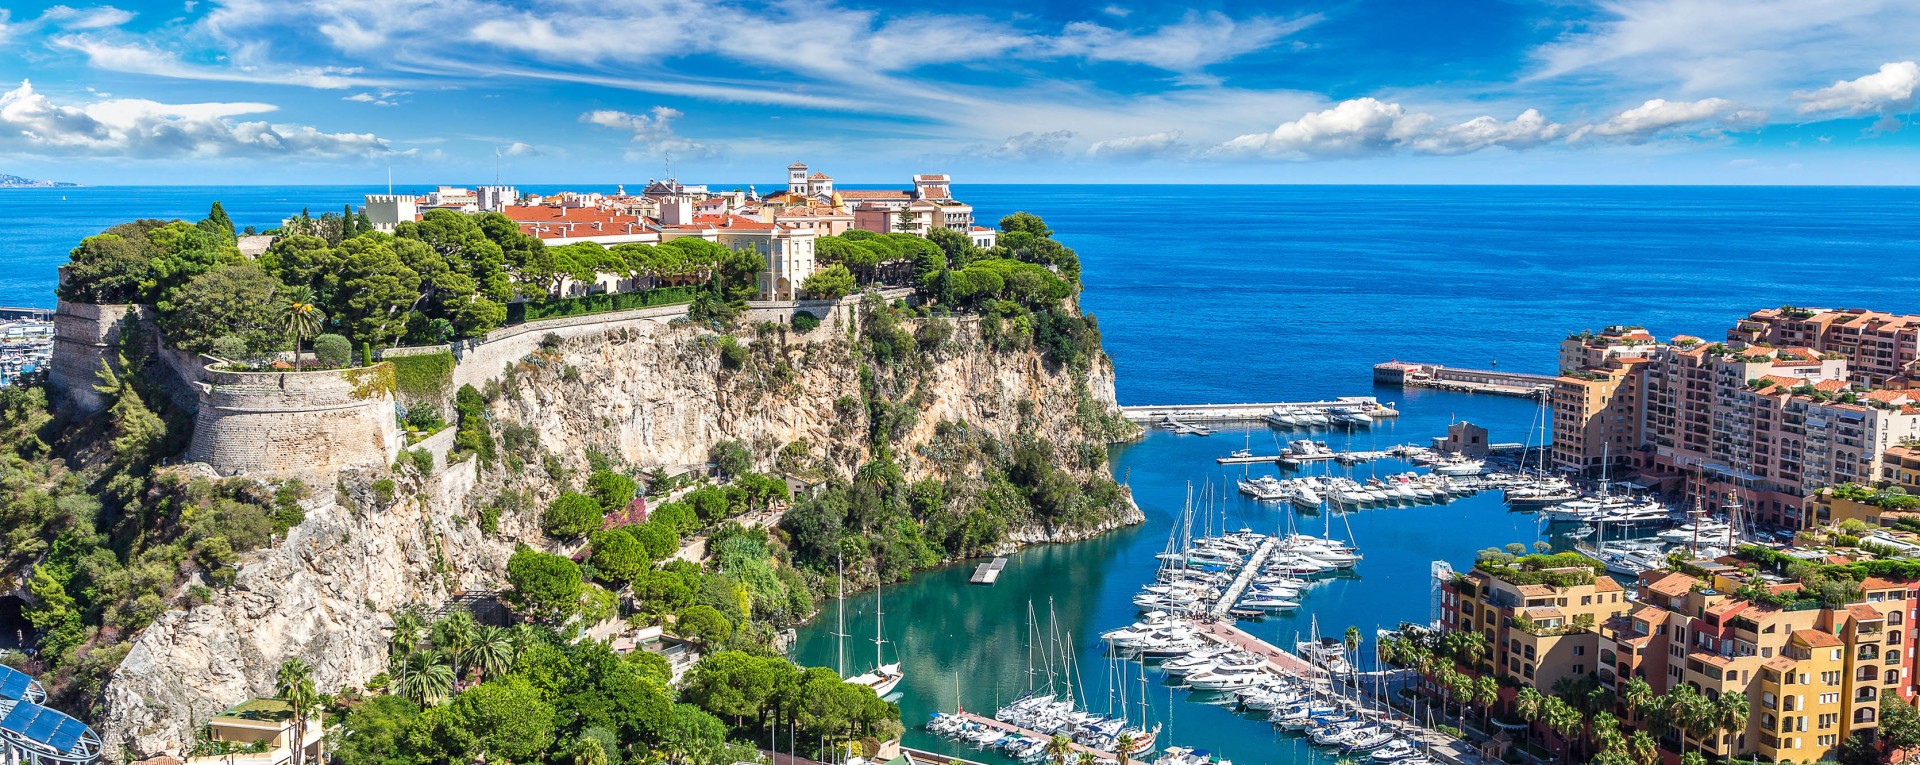 Private Full Day Tour: The best of the French Riviera with driver/guide